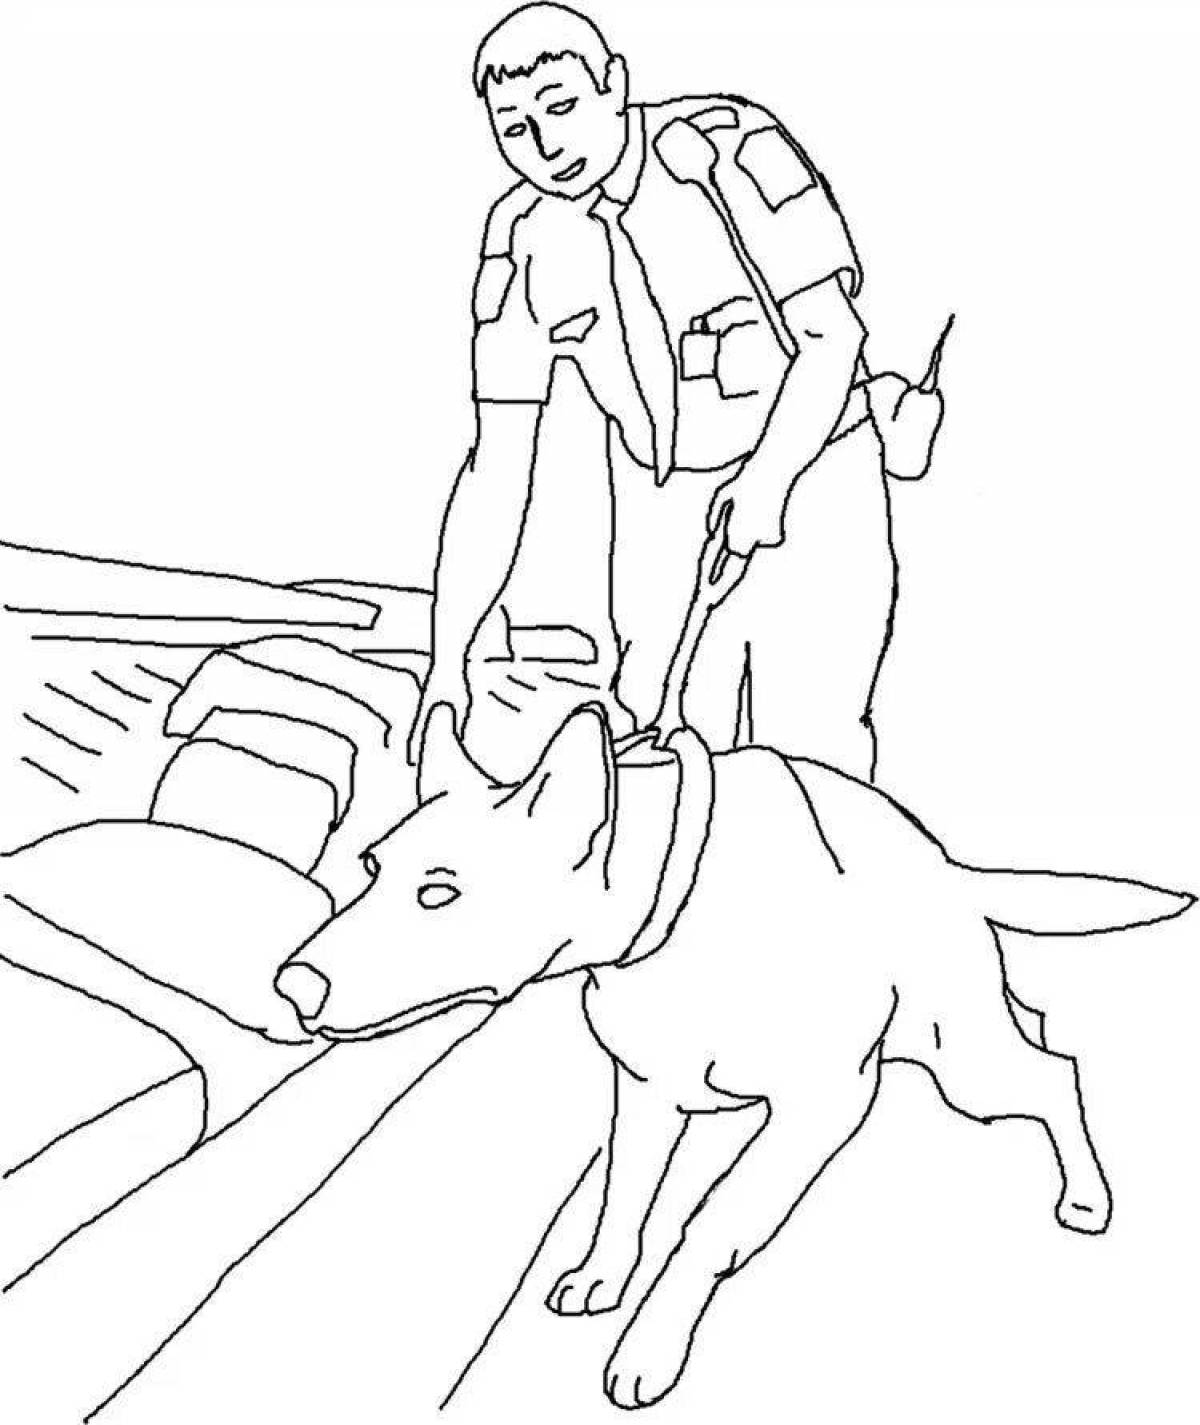 Alert police dog coloring page